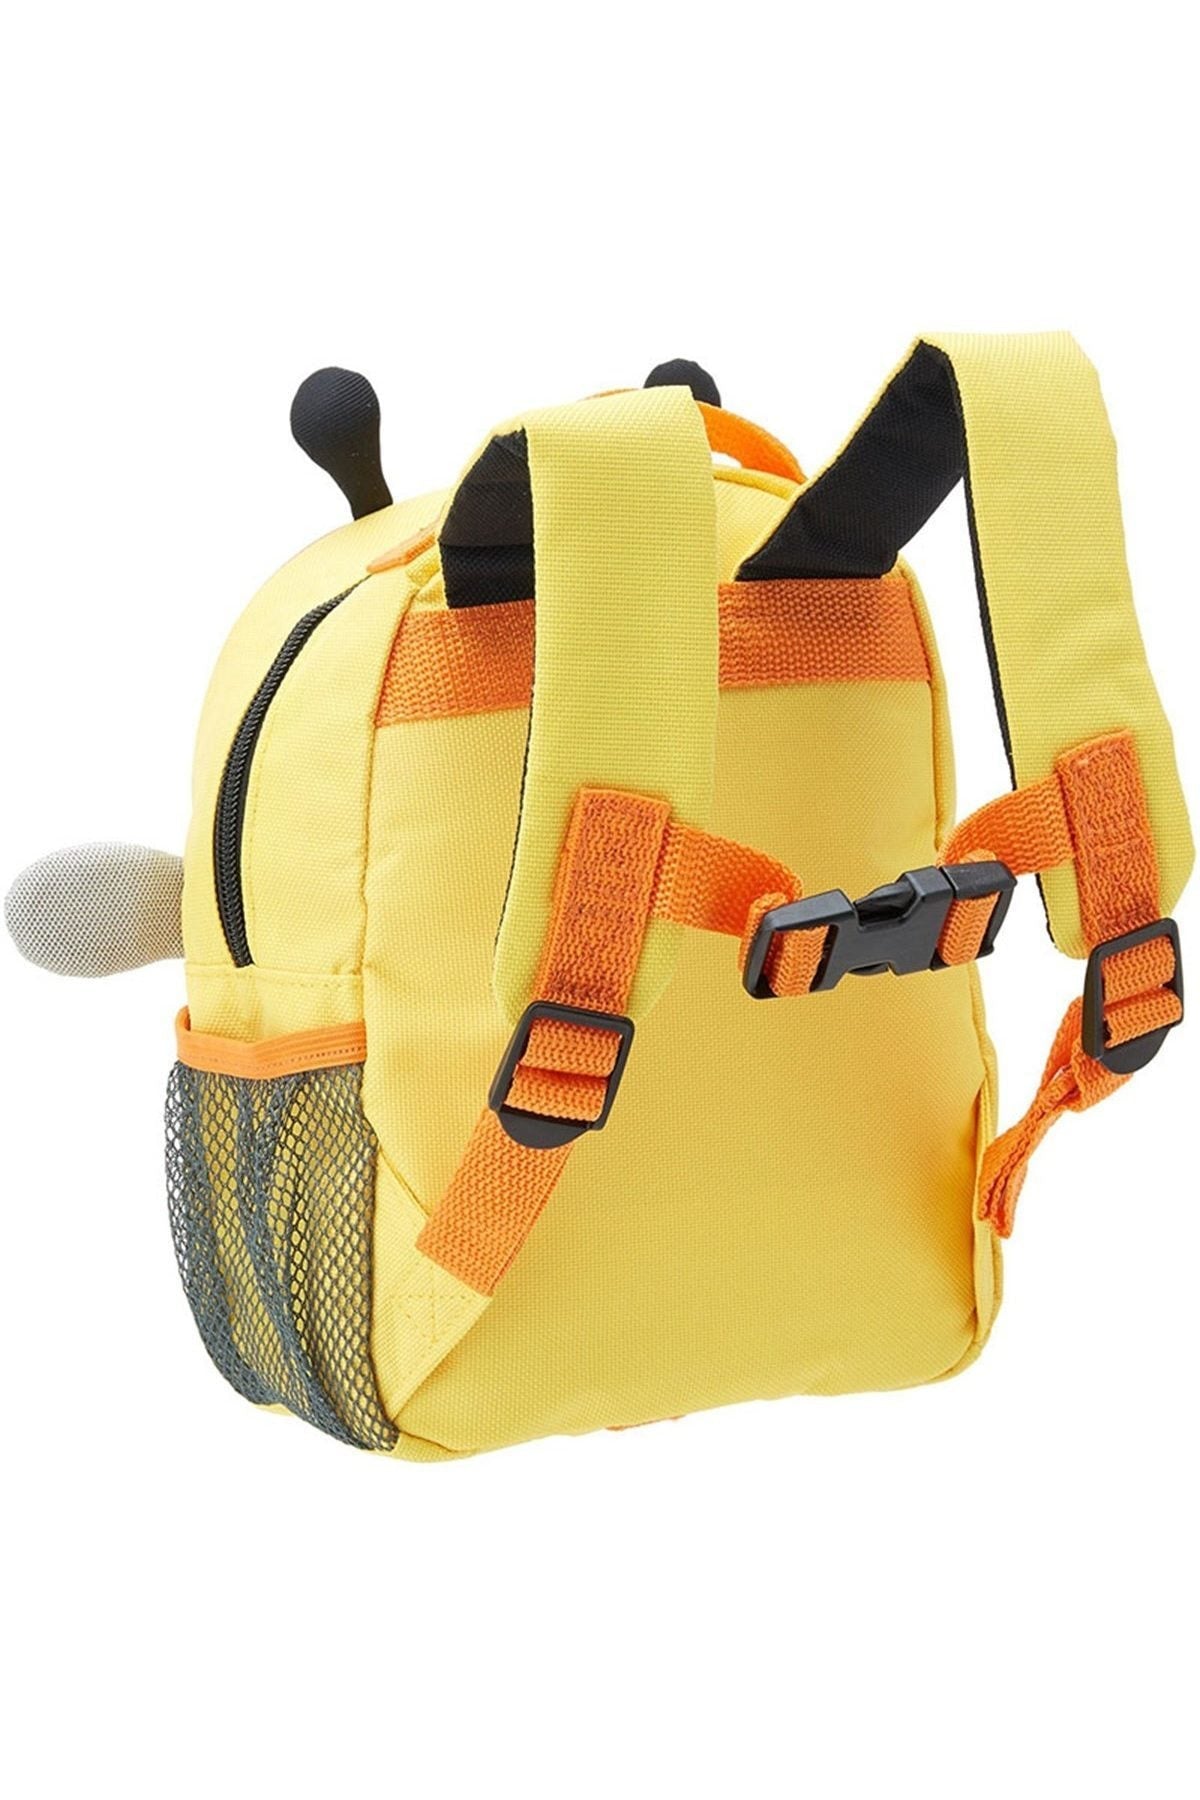 Zoo Backpack with Seat Belt Yellow-Black